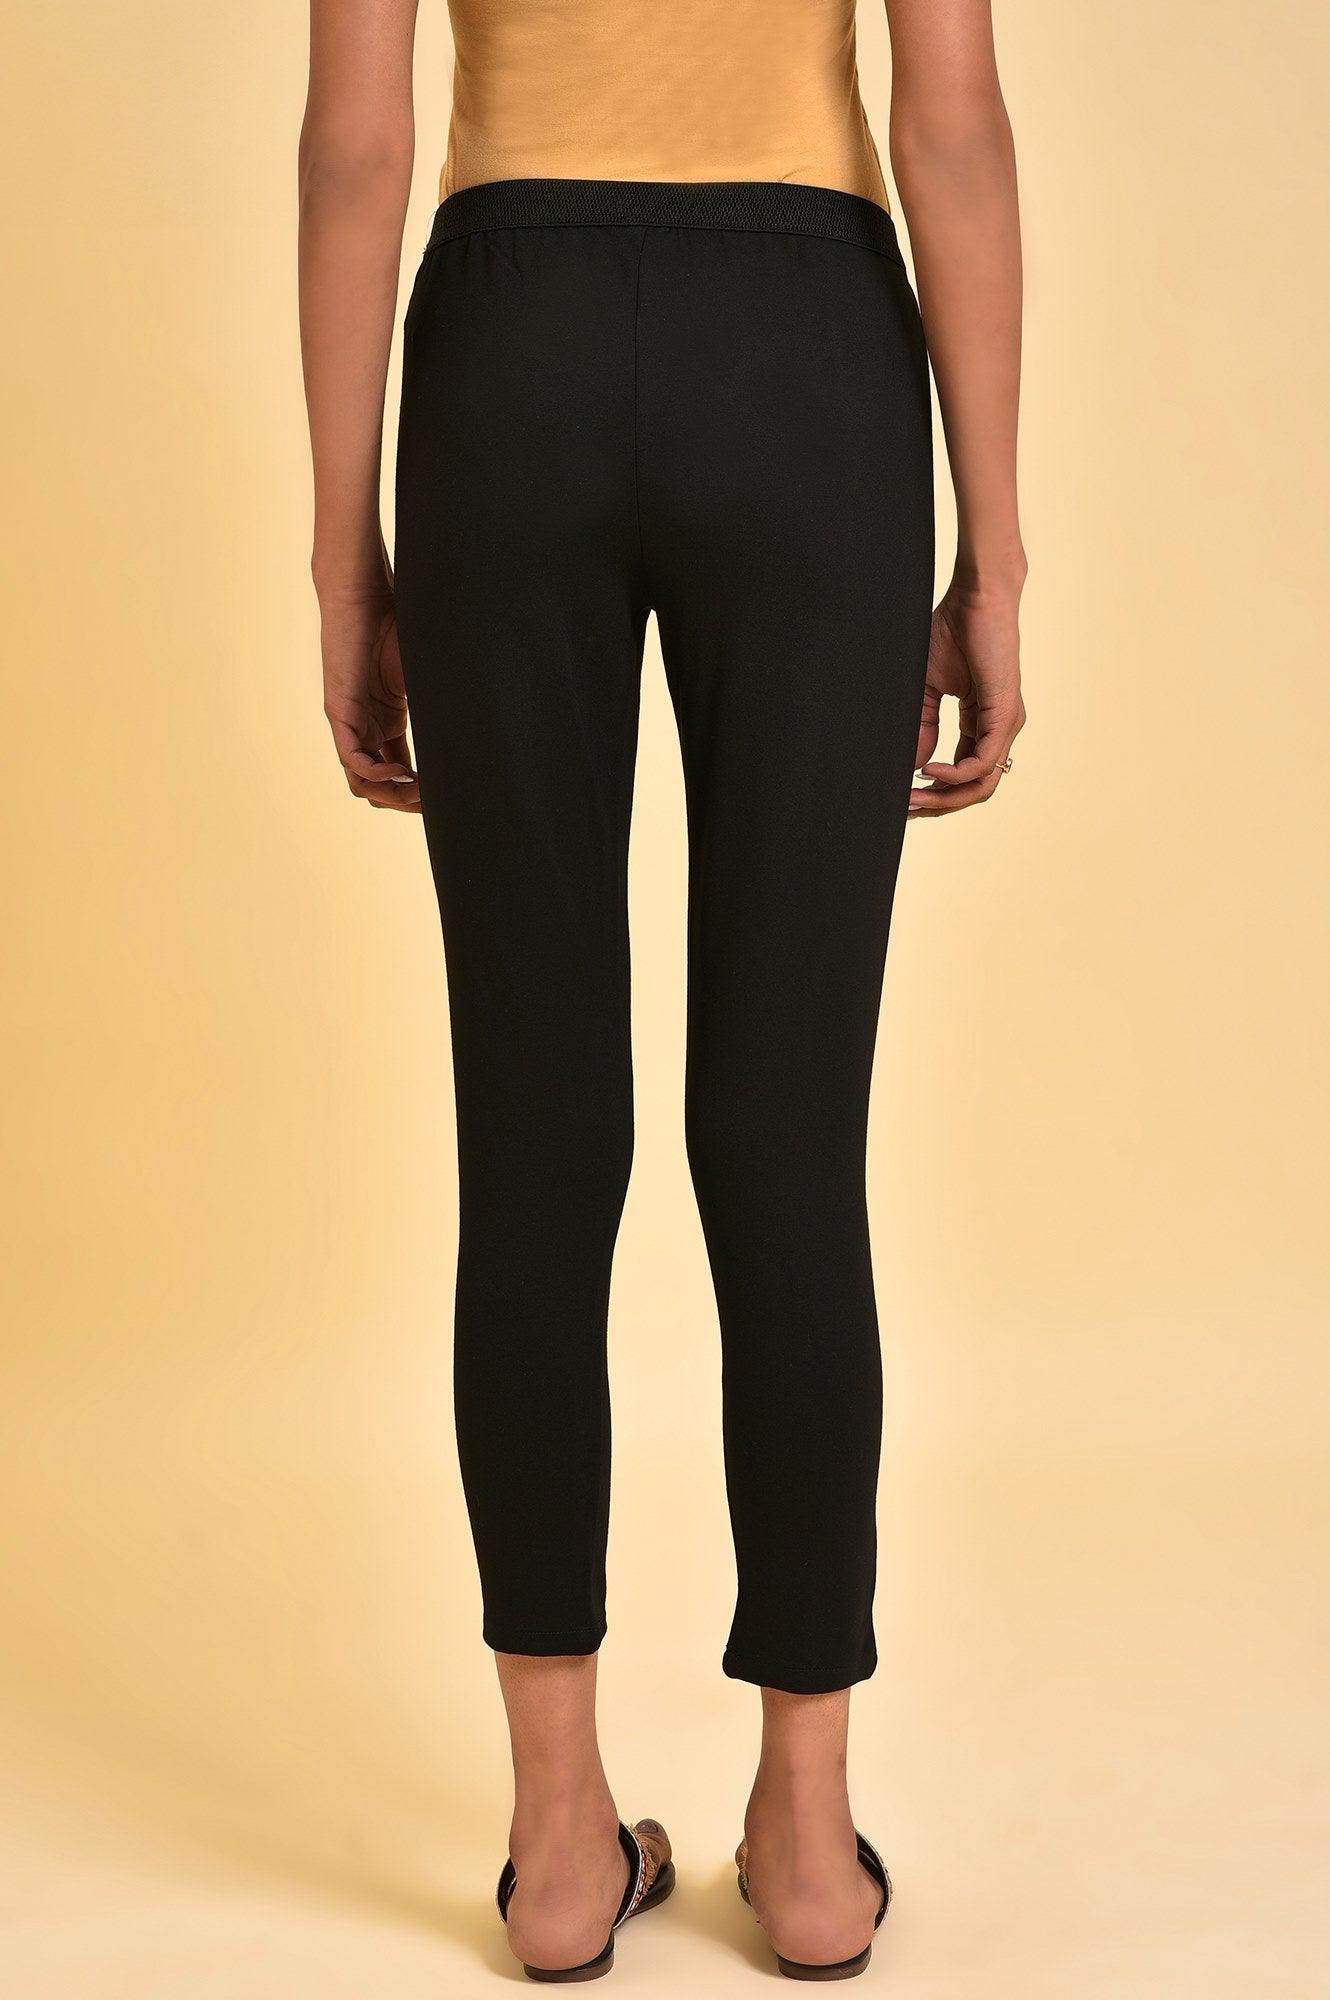 Black Fitted Jeggings - wforwoman